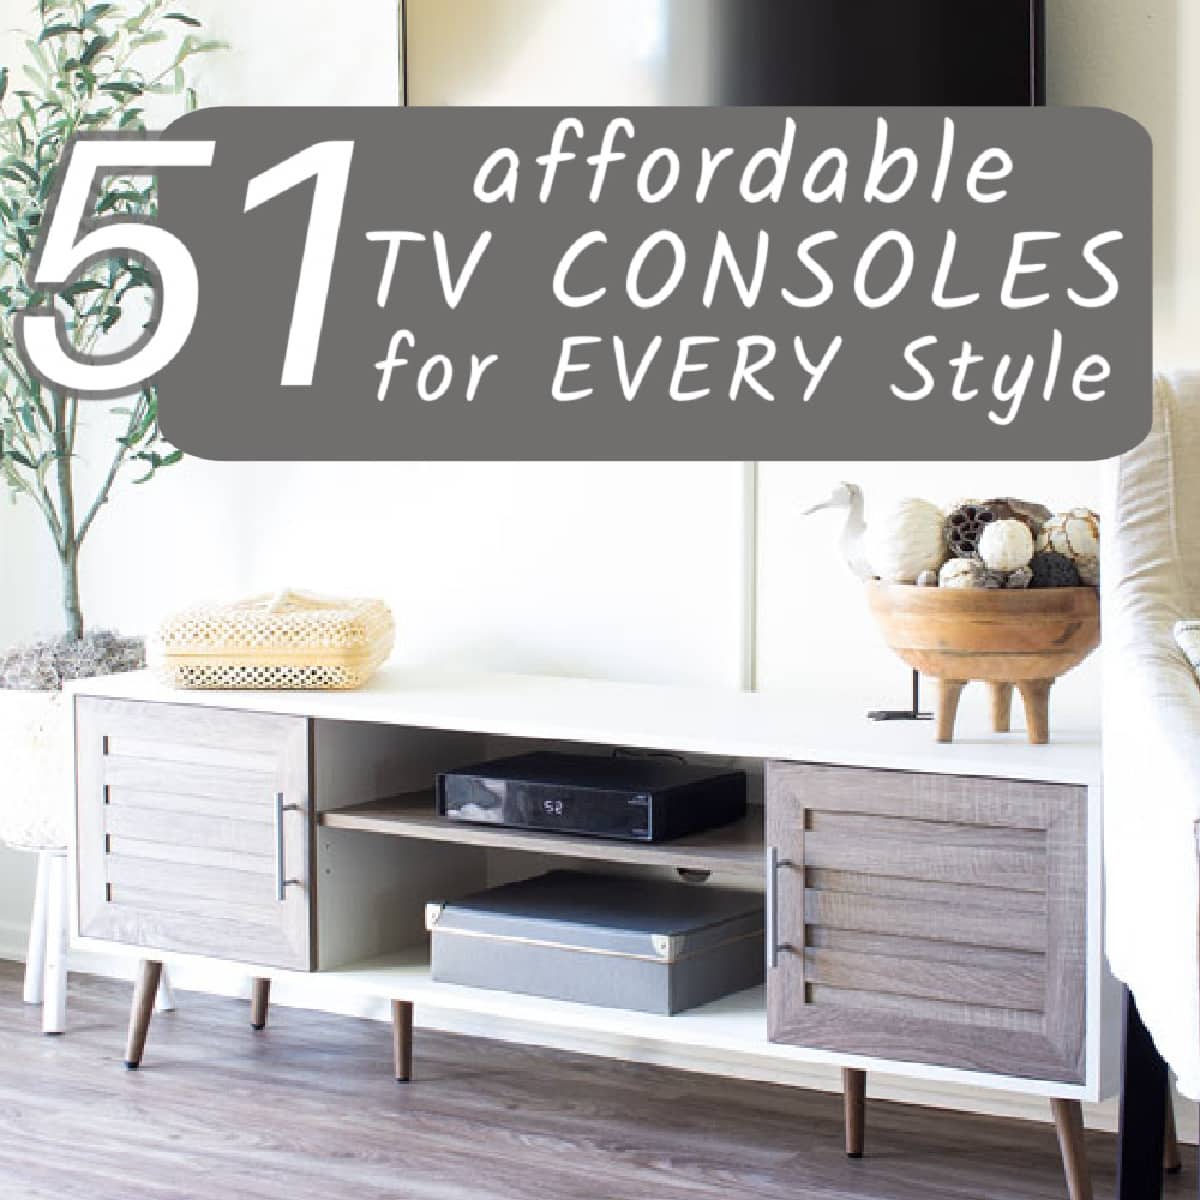 affordable tv consoles with wood doors and coastal decor elements and tv mounted above